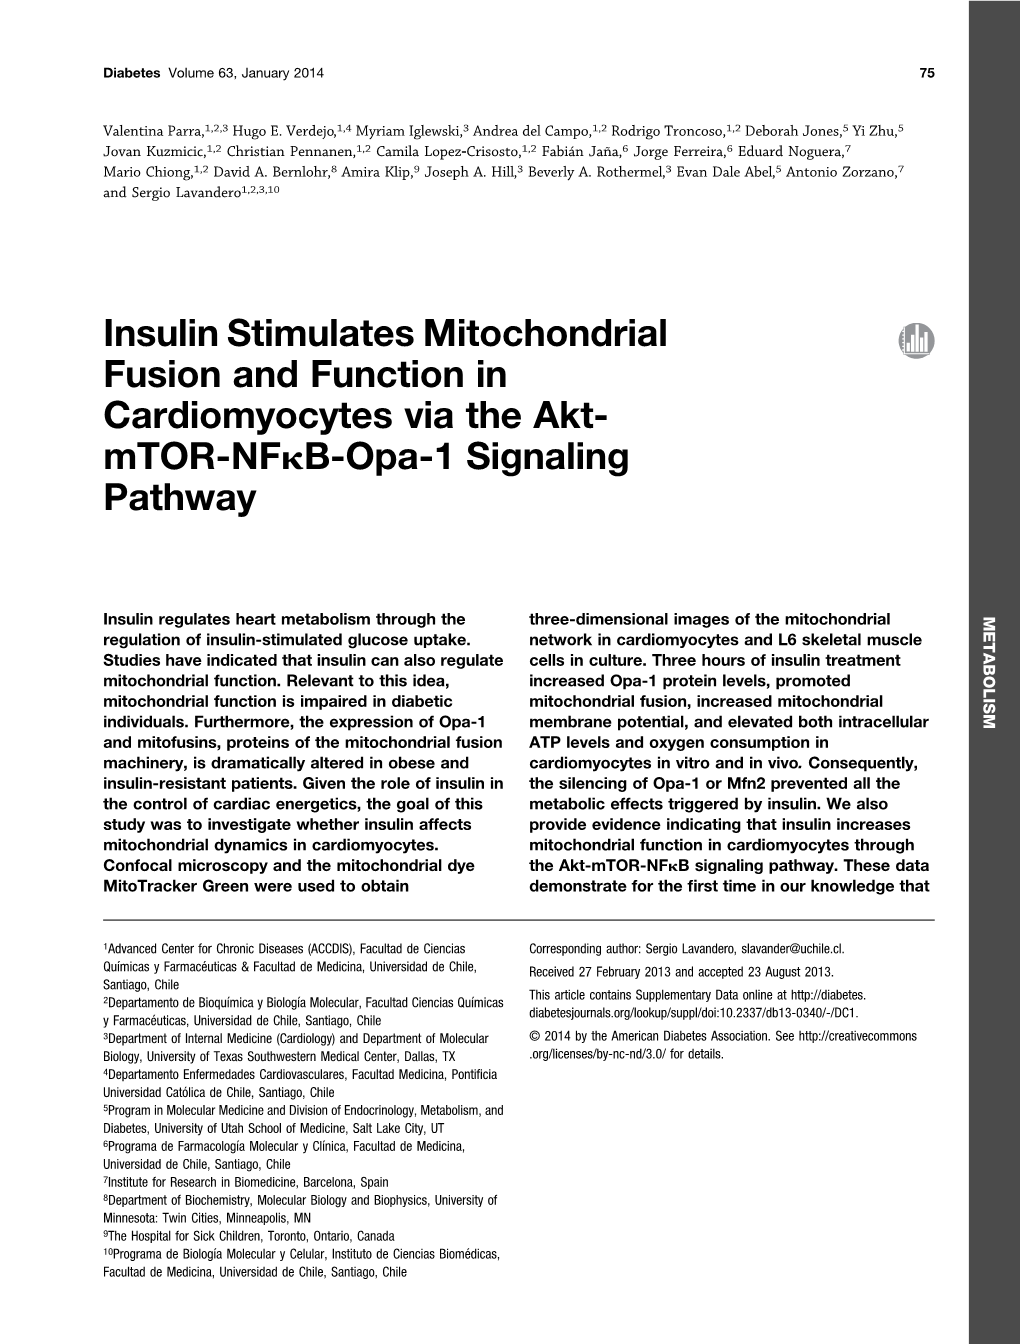 Insulin Stimulates Mitochondrial Fusion and Function in Cardiomyocytes Via the Akt- Mtor-Nfkb-Opa-1 Signaling Pathway